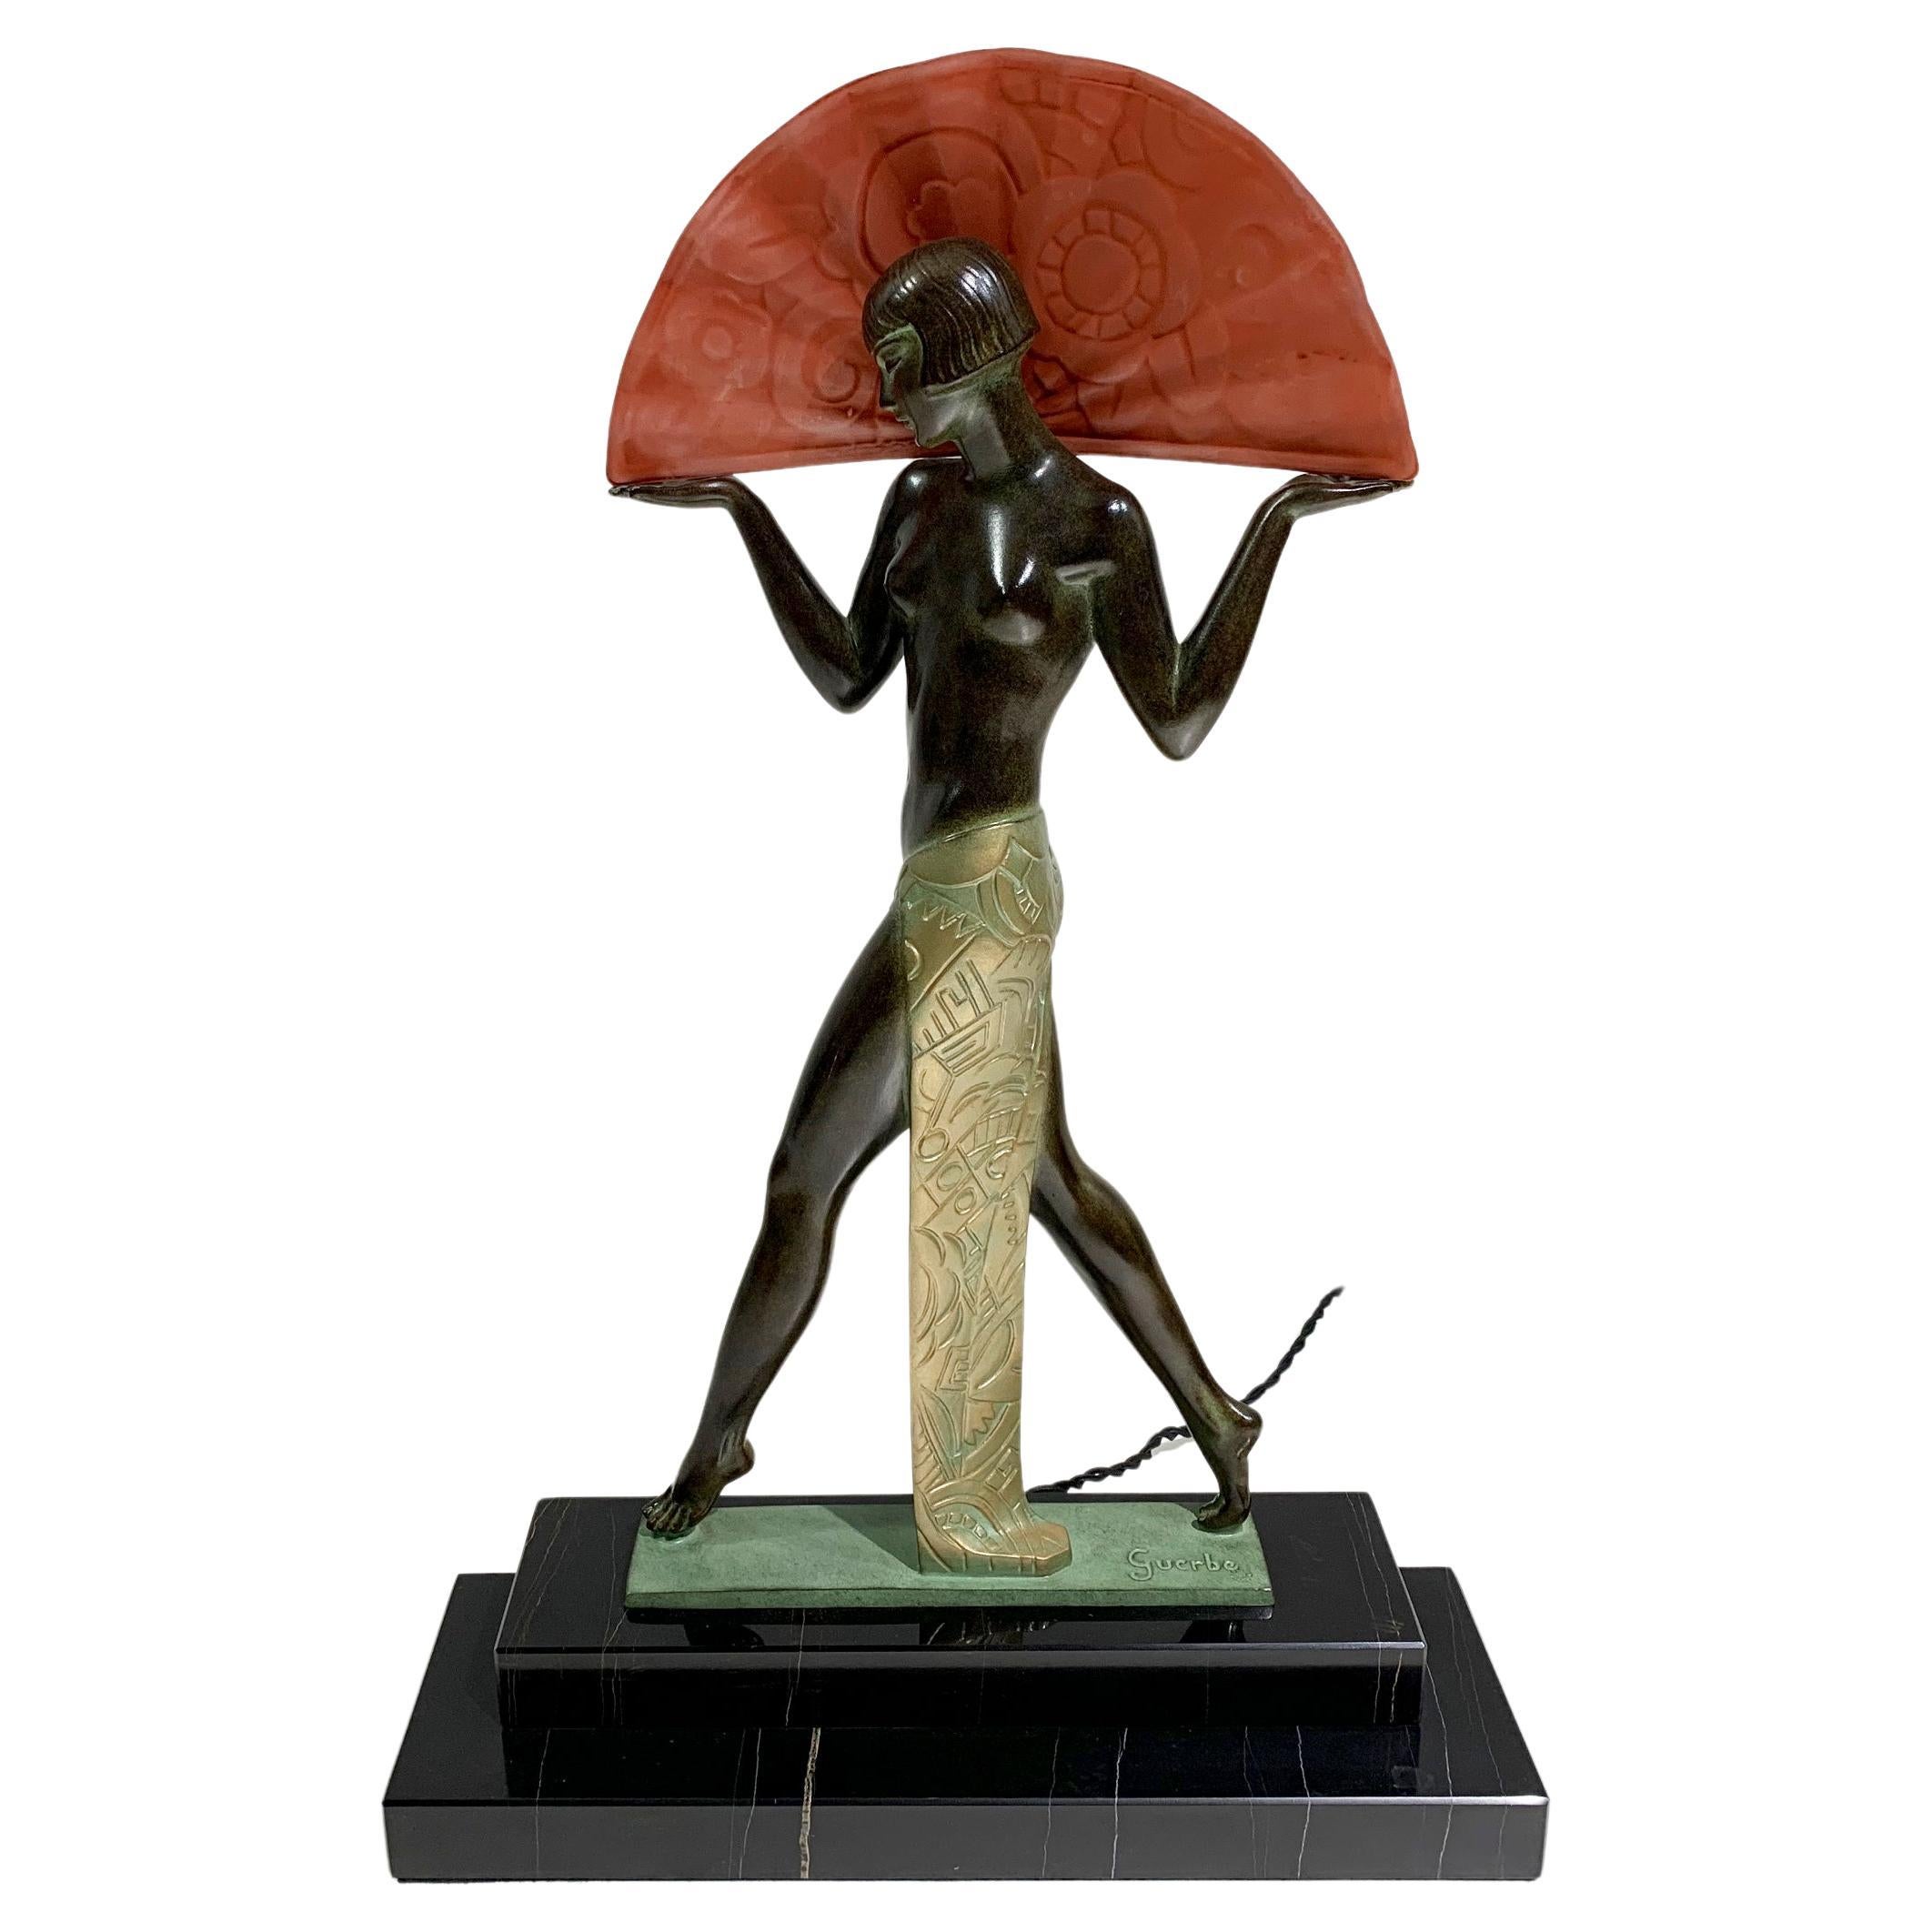 Espana Sculpture Spanish Dancer Table Lamp by Raymonde Guerbe for Max Le Verrier